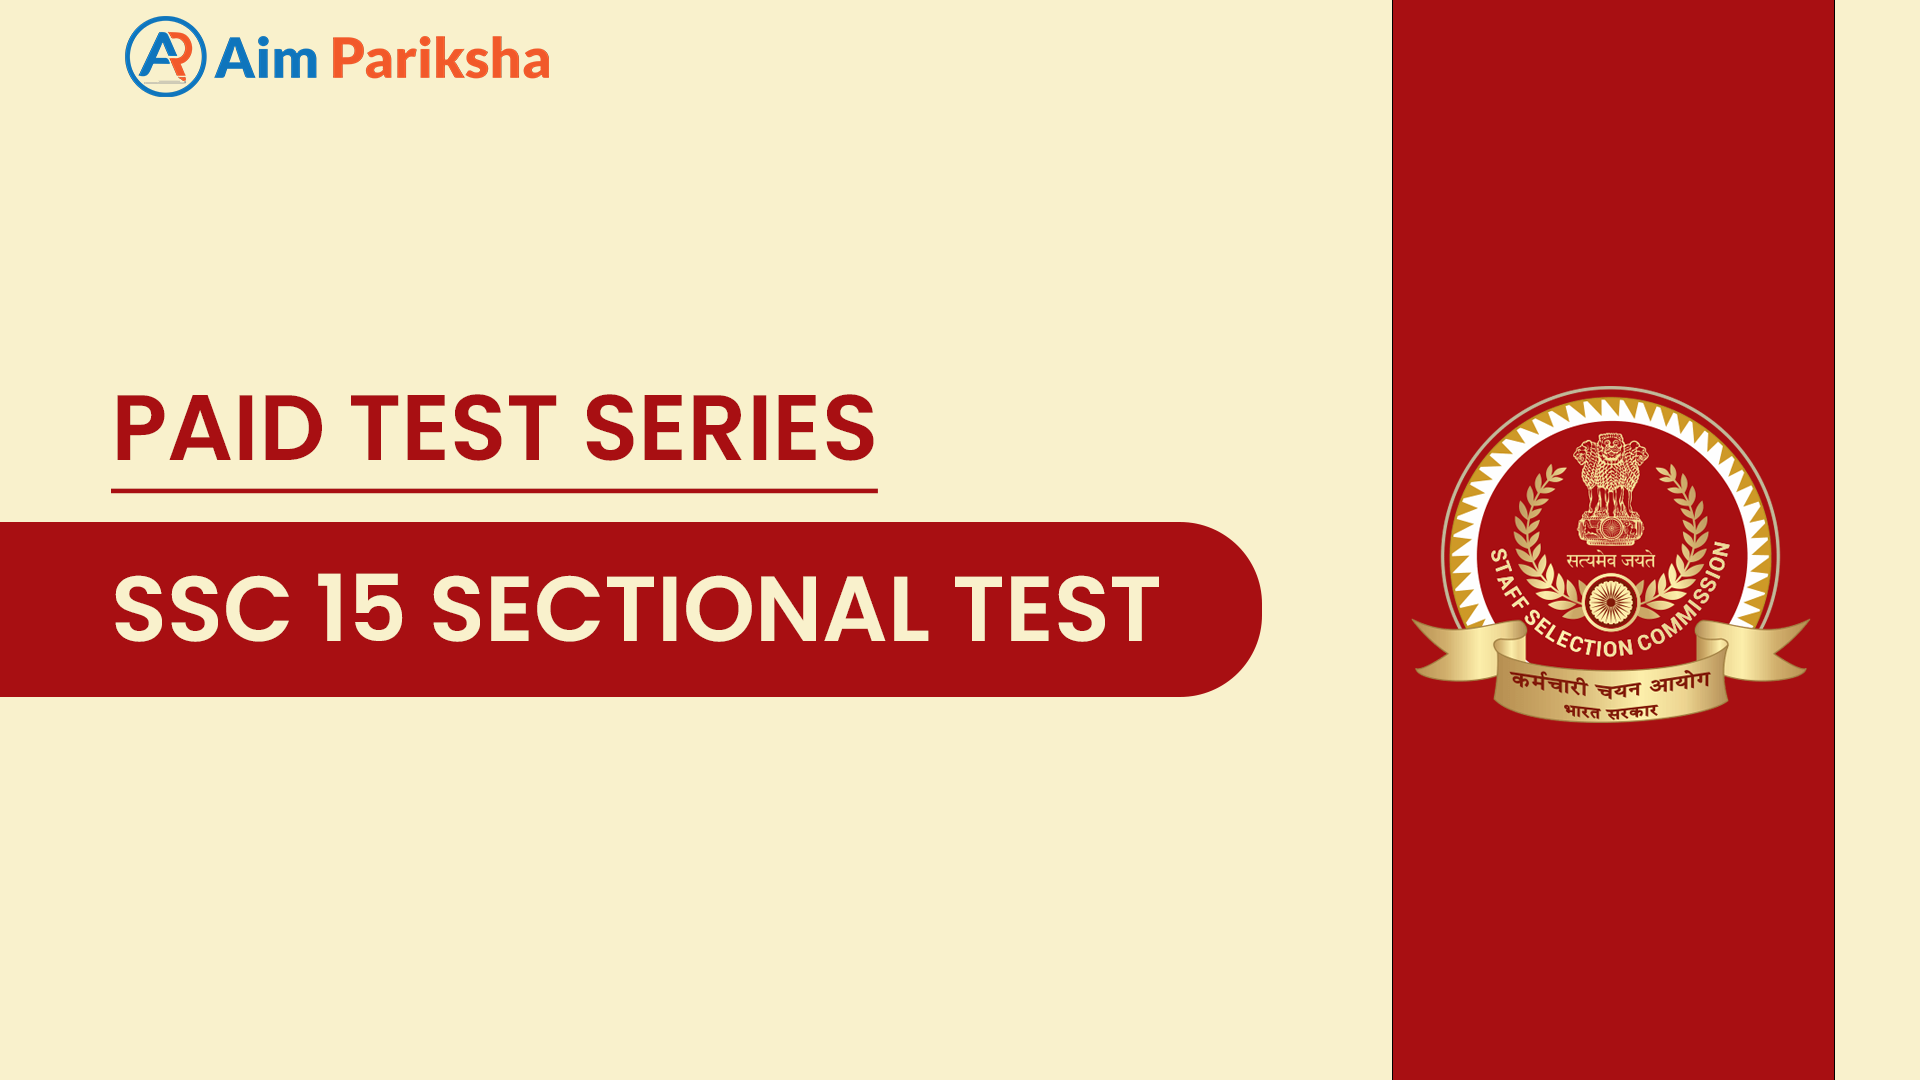 SSC 15 Sectional Test